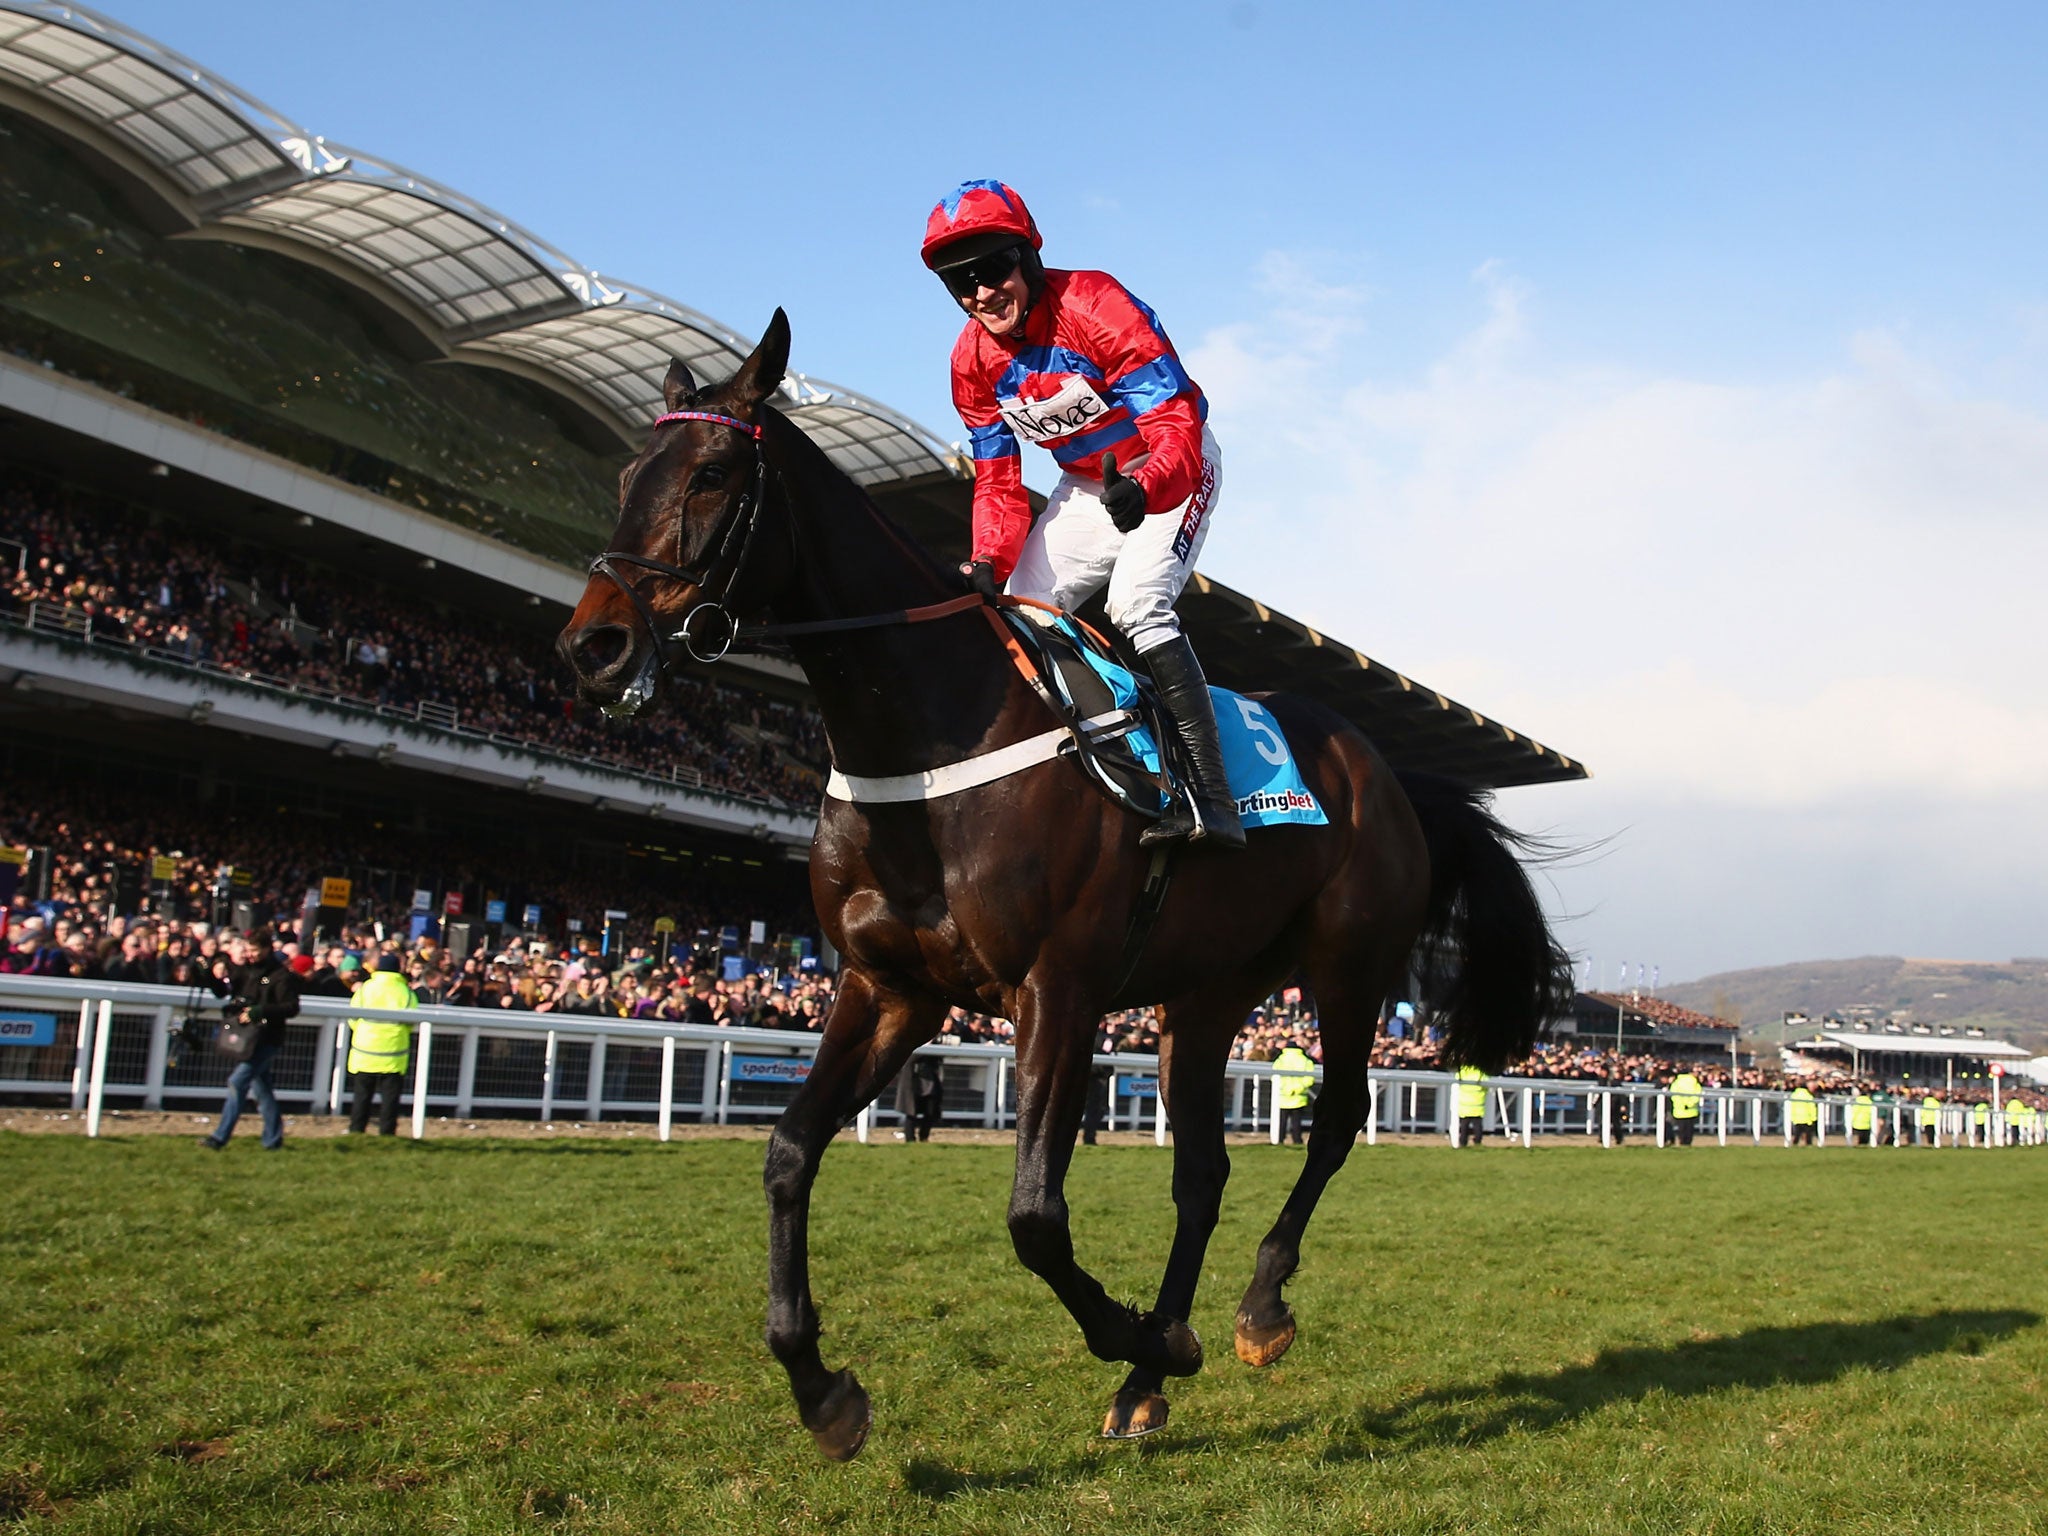 Sprinter Sacre, ridden by Barry Geraghty, after winning he Queen Mother Champion Steeple Chase at Cheltenham last month